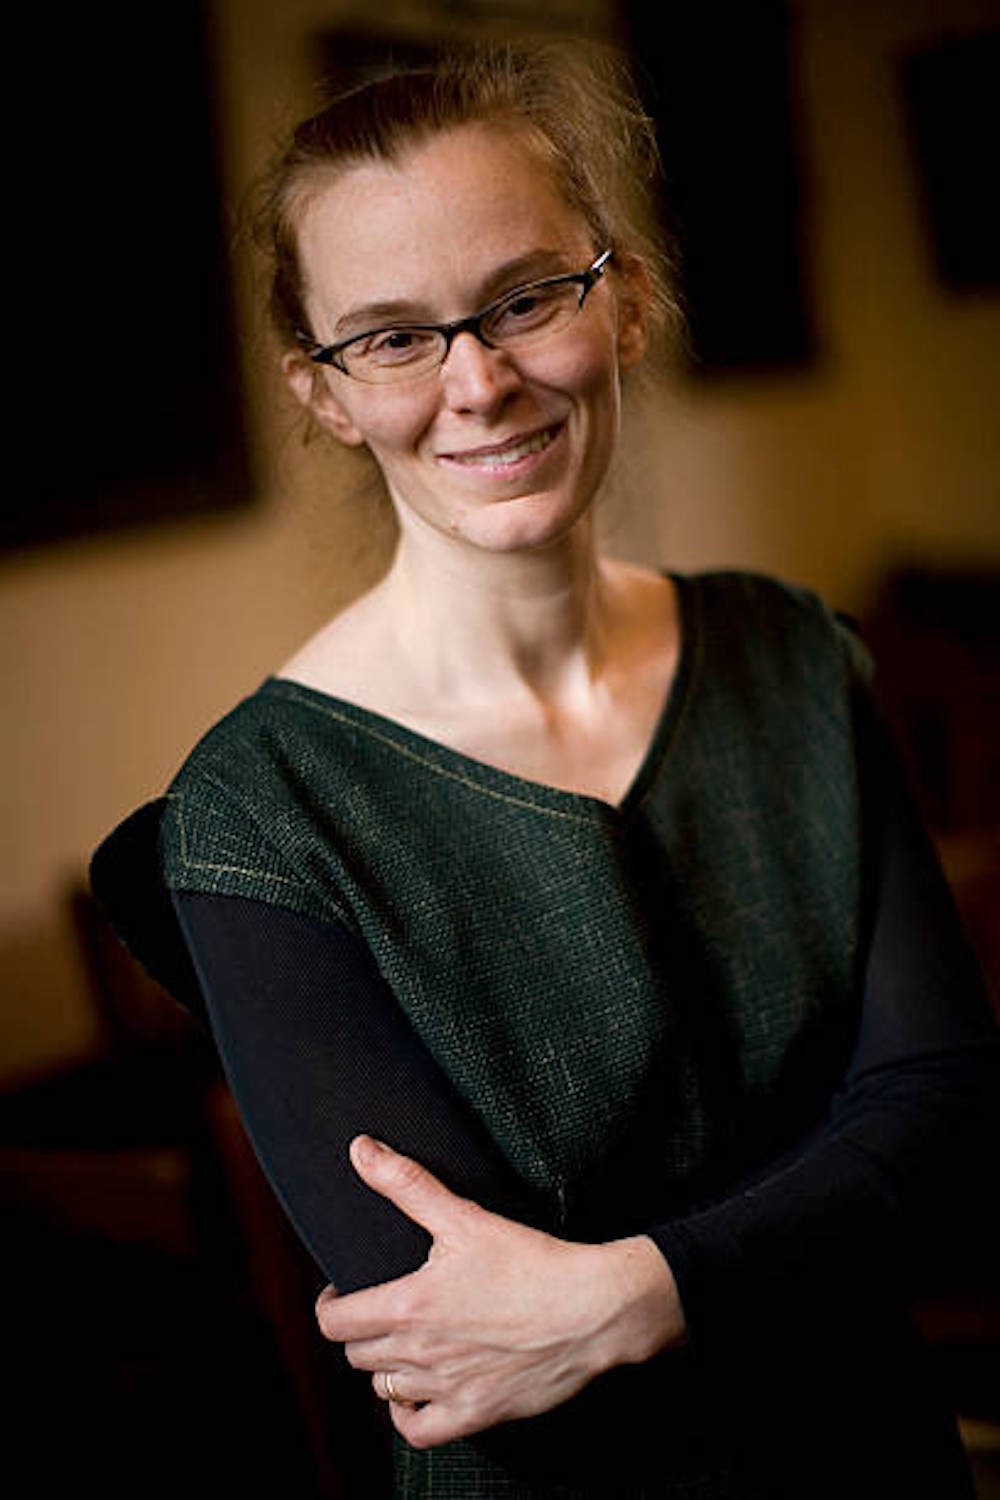 white person with glasses, smiling